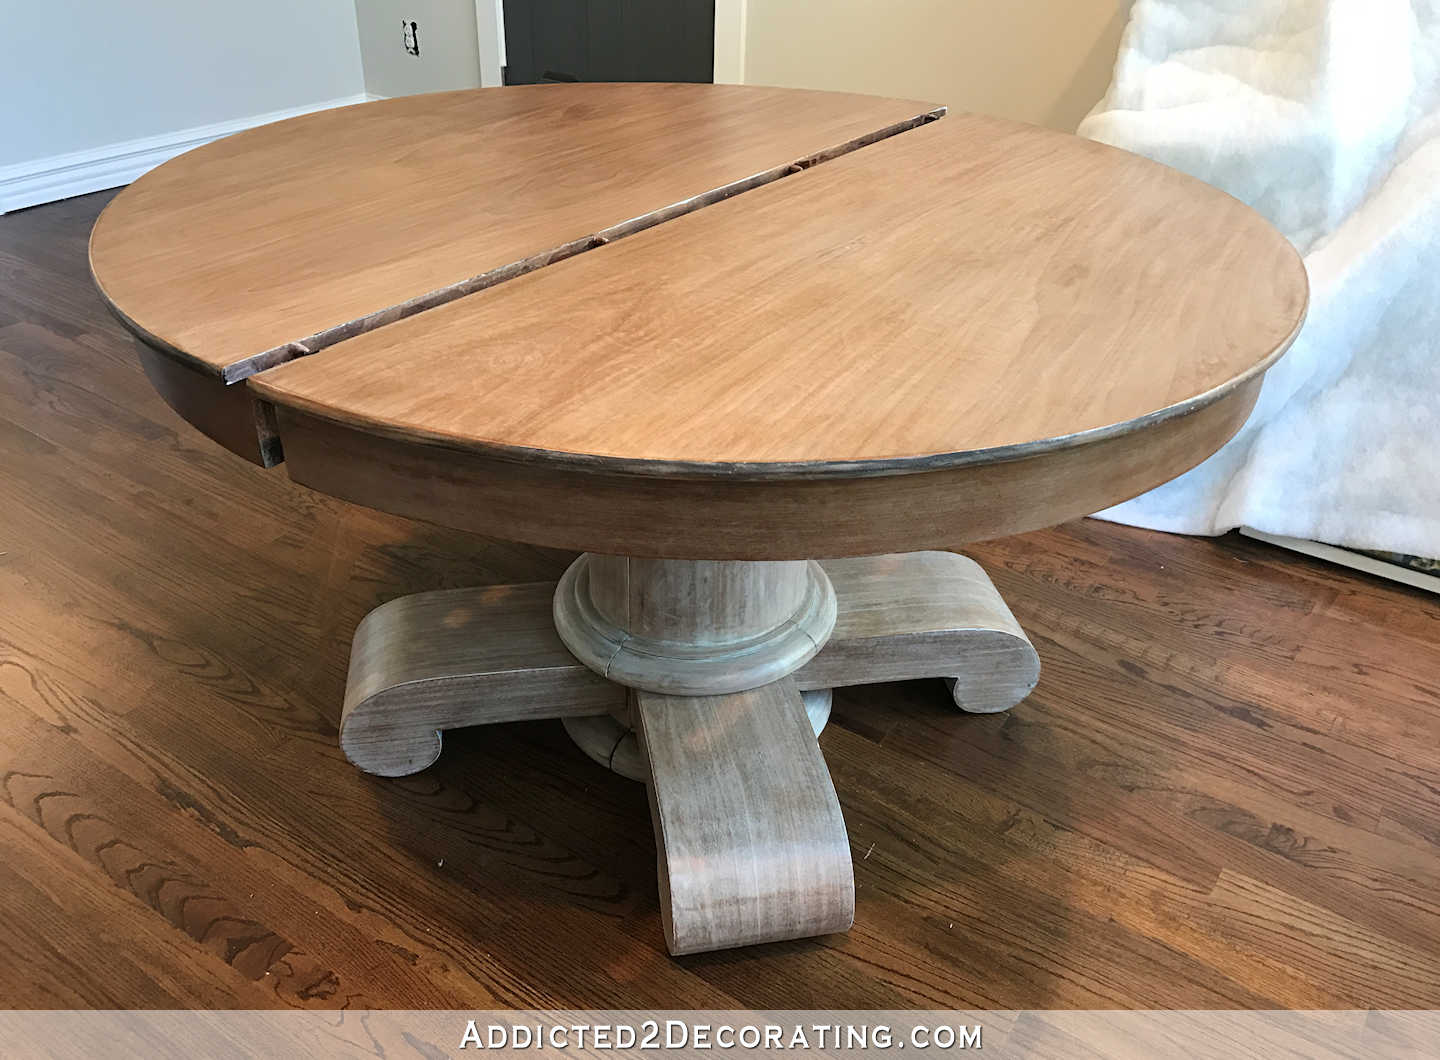 breakfast room dining table makeover - new finish toned down with stain - comparison